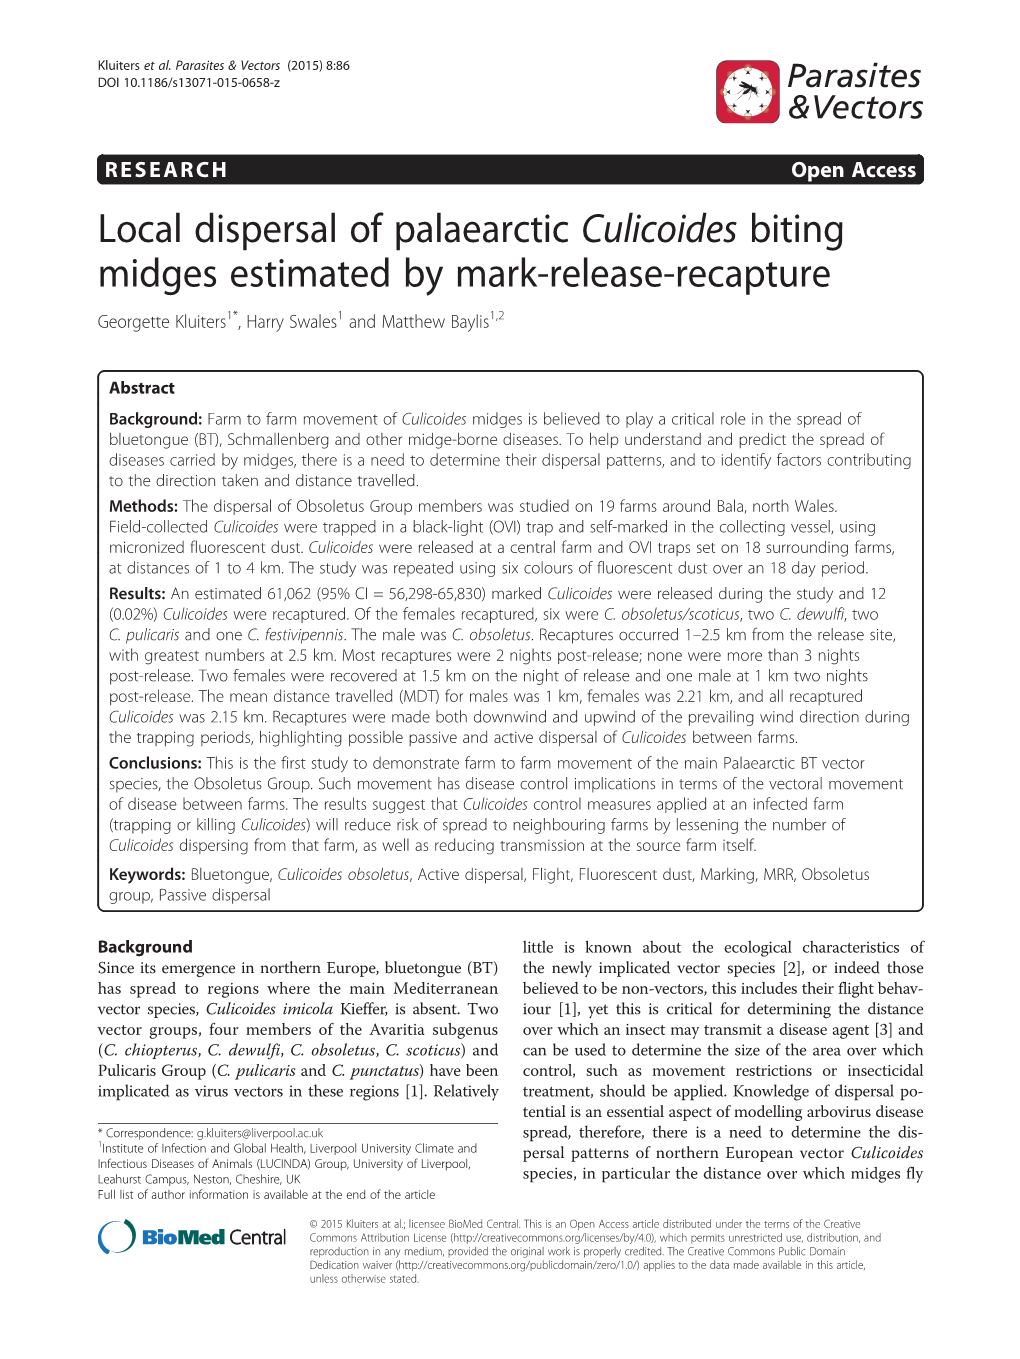 Local Dispersal of Palaearctic Culicoides Biting Midges Estimated by Mark-Release-Recapture Georgette Kluiters1*, Harry Swales1 and Matthew Baylis1,2